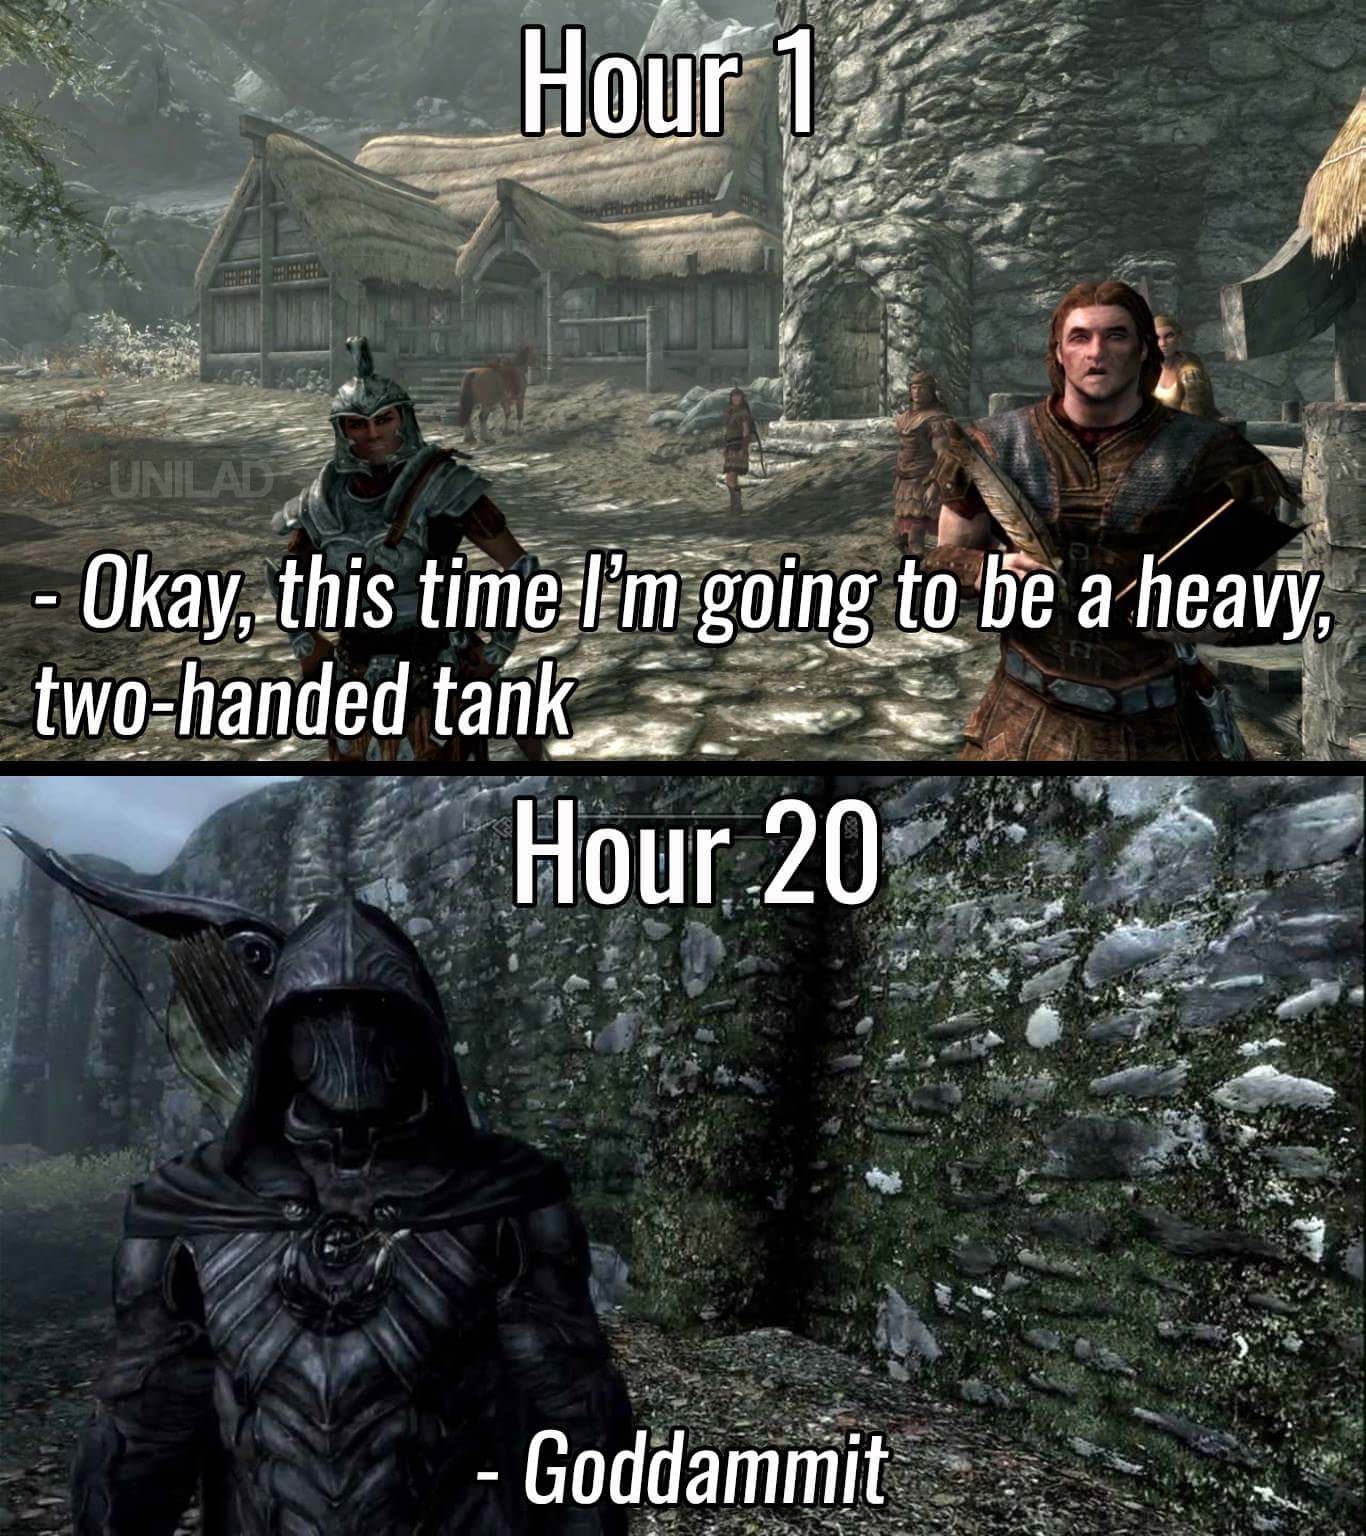 meme - skyrim bow meme - Hour 1 Unilad Okay, this time I'm going to be a heavy, twohanded tank Hour 20. Goddammit